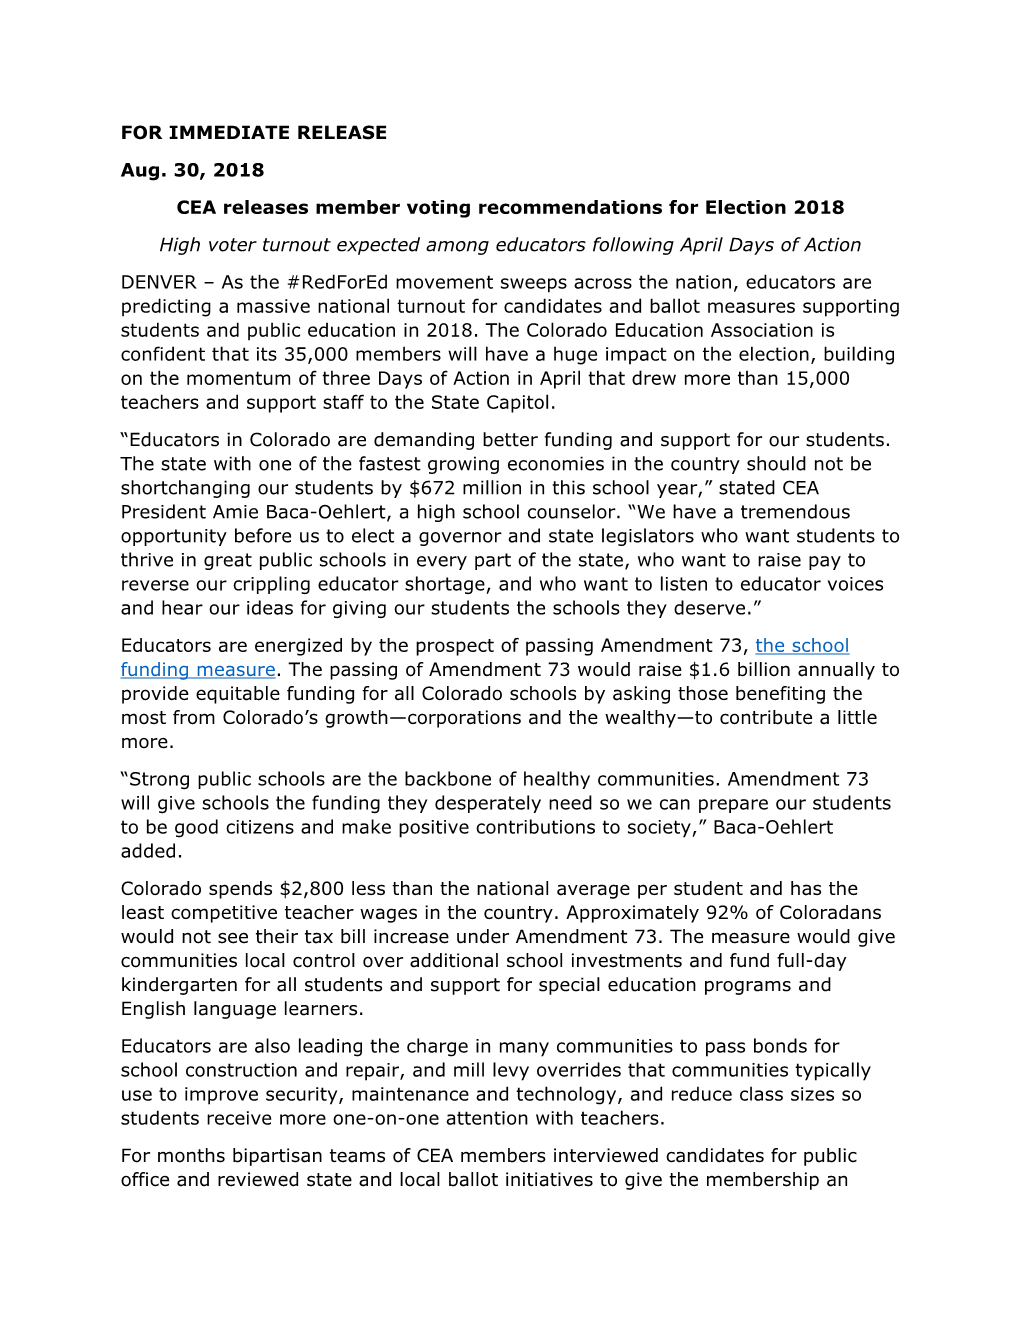 FOR IMMEDIATE RELEASE Aug. 30, 2018 CEA Releases Member Voting Recommendations for Election 2018 High Voter Turnout Expected